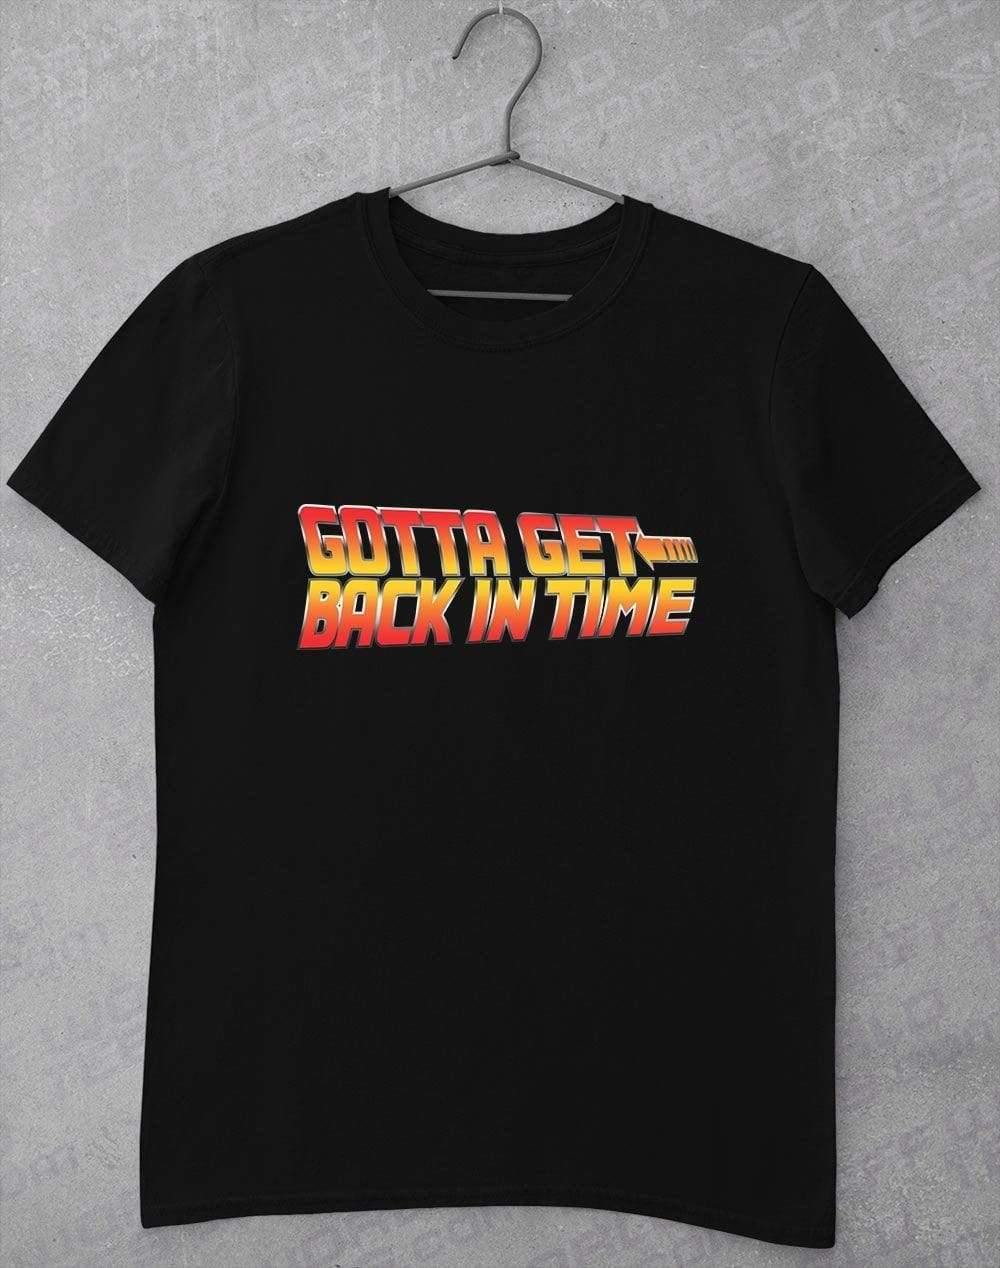 Back in Time T-Shirt L / Black  - Off World Tees